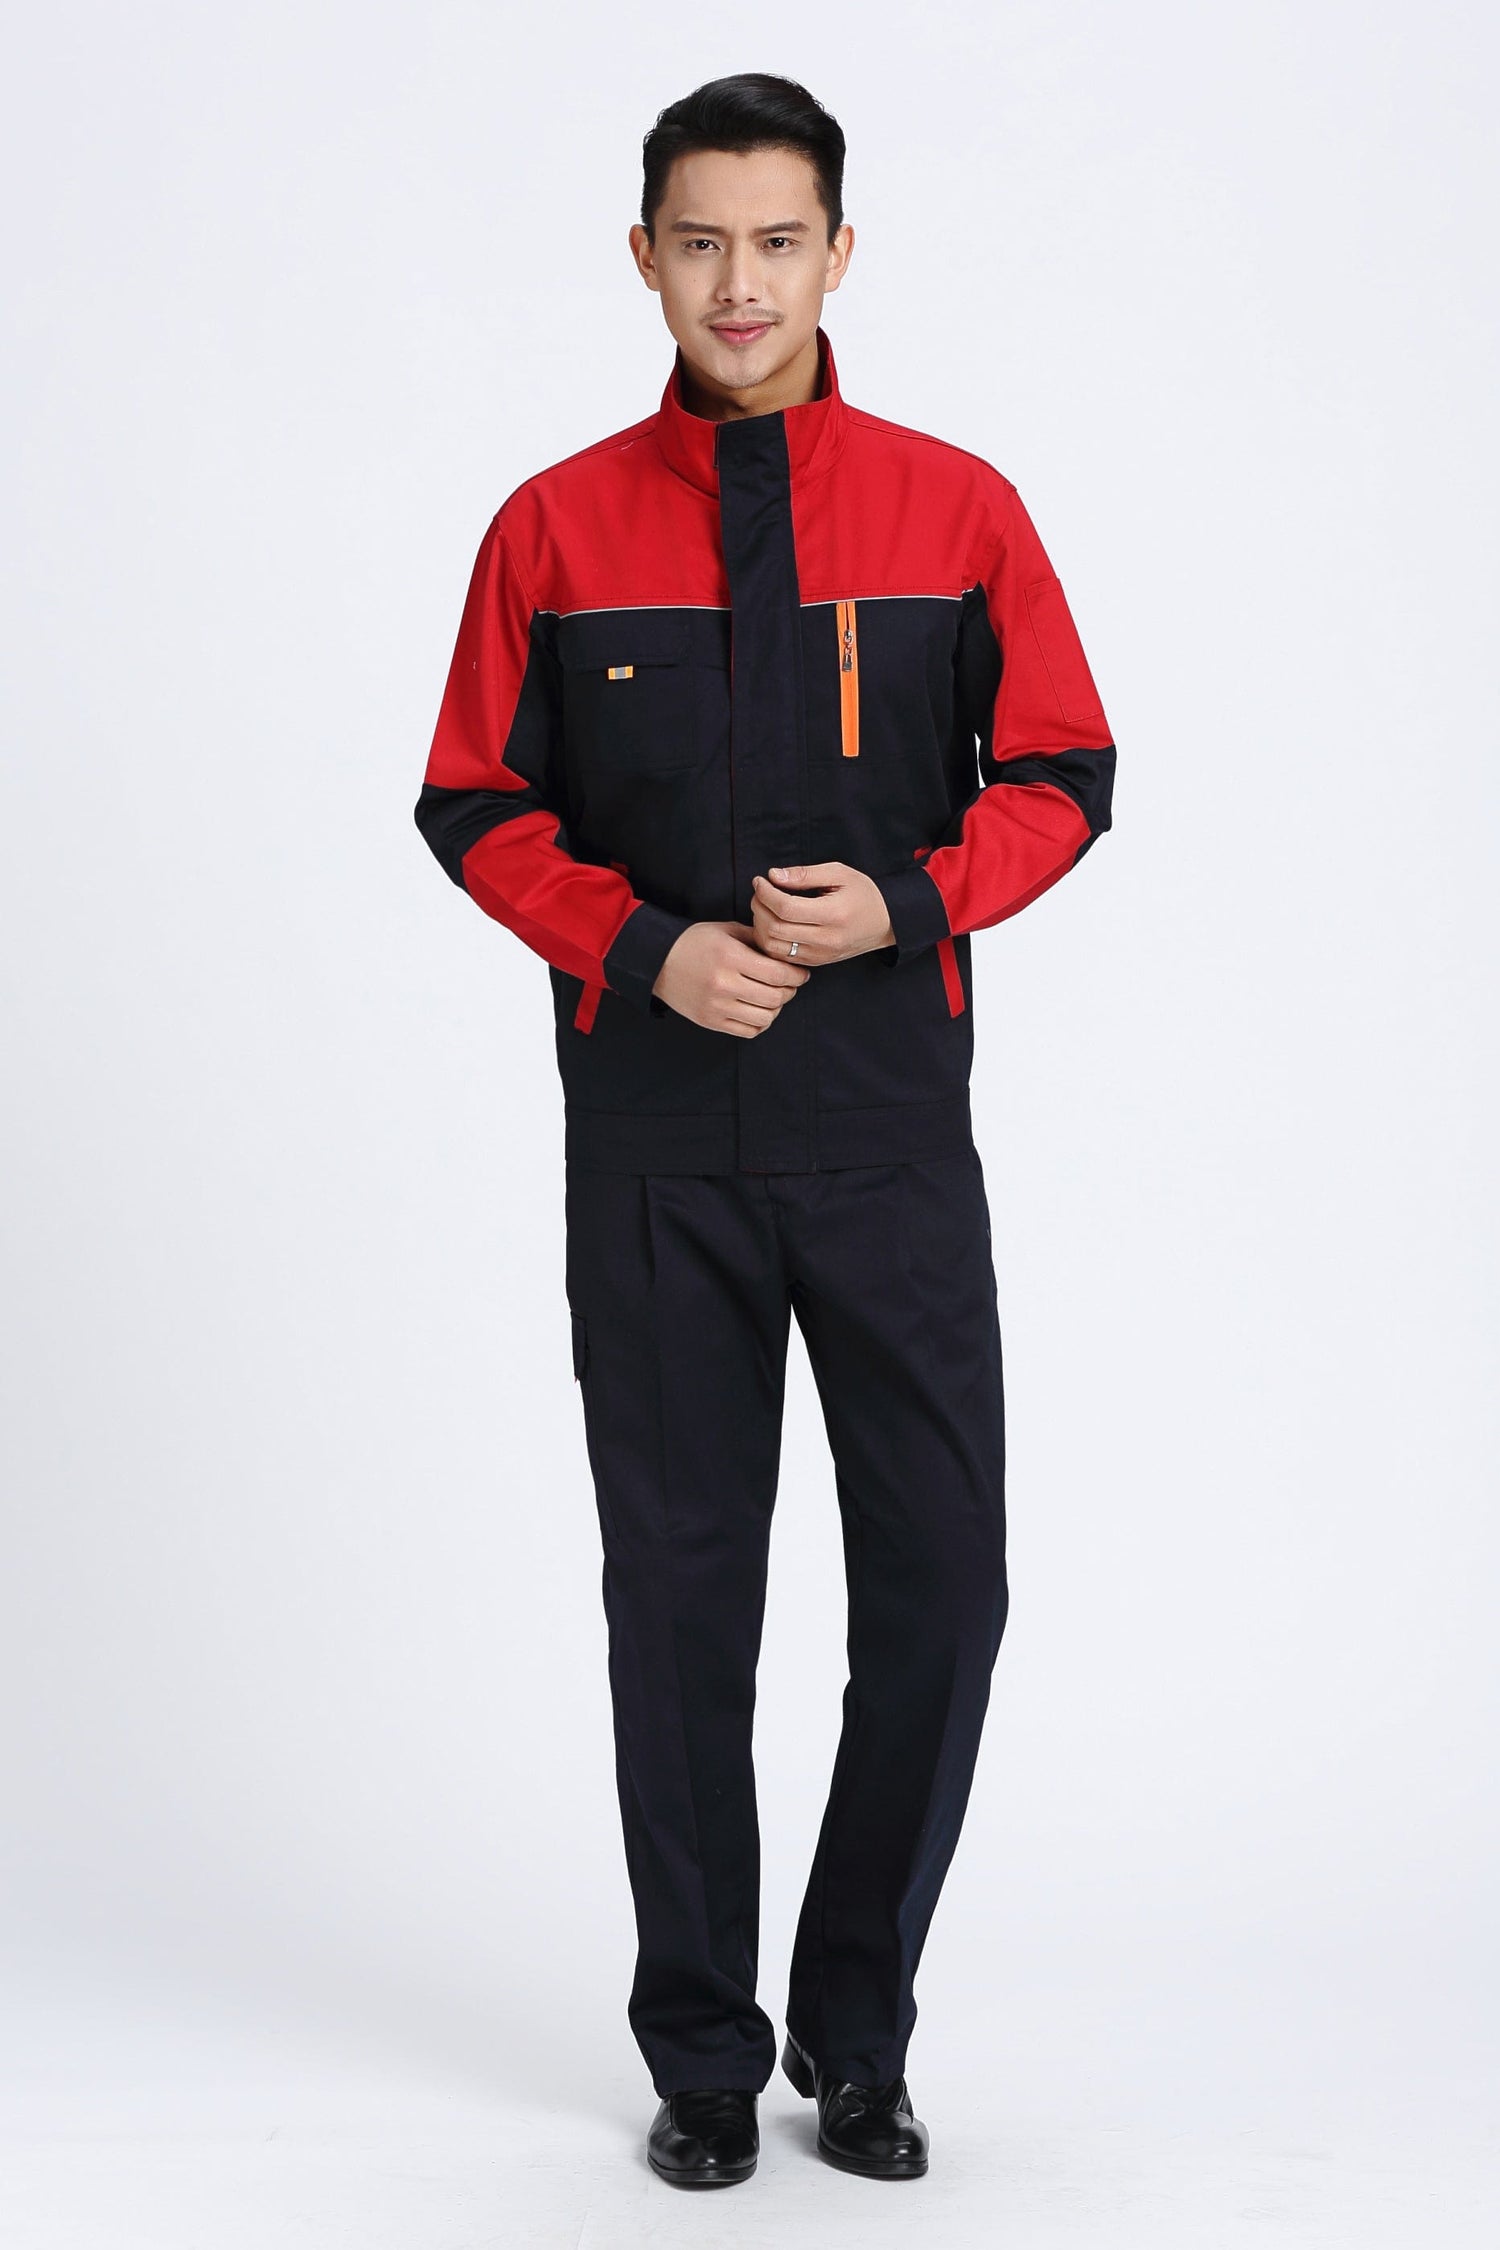 Corals Trading Co. 可樂思百貨商行 涤棉 Spring and Autumn Long Sleeve Polyester-Cotton Workwear SD-W2503